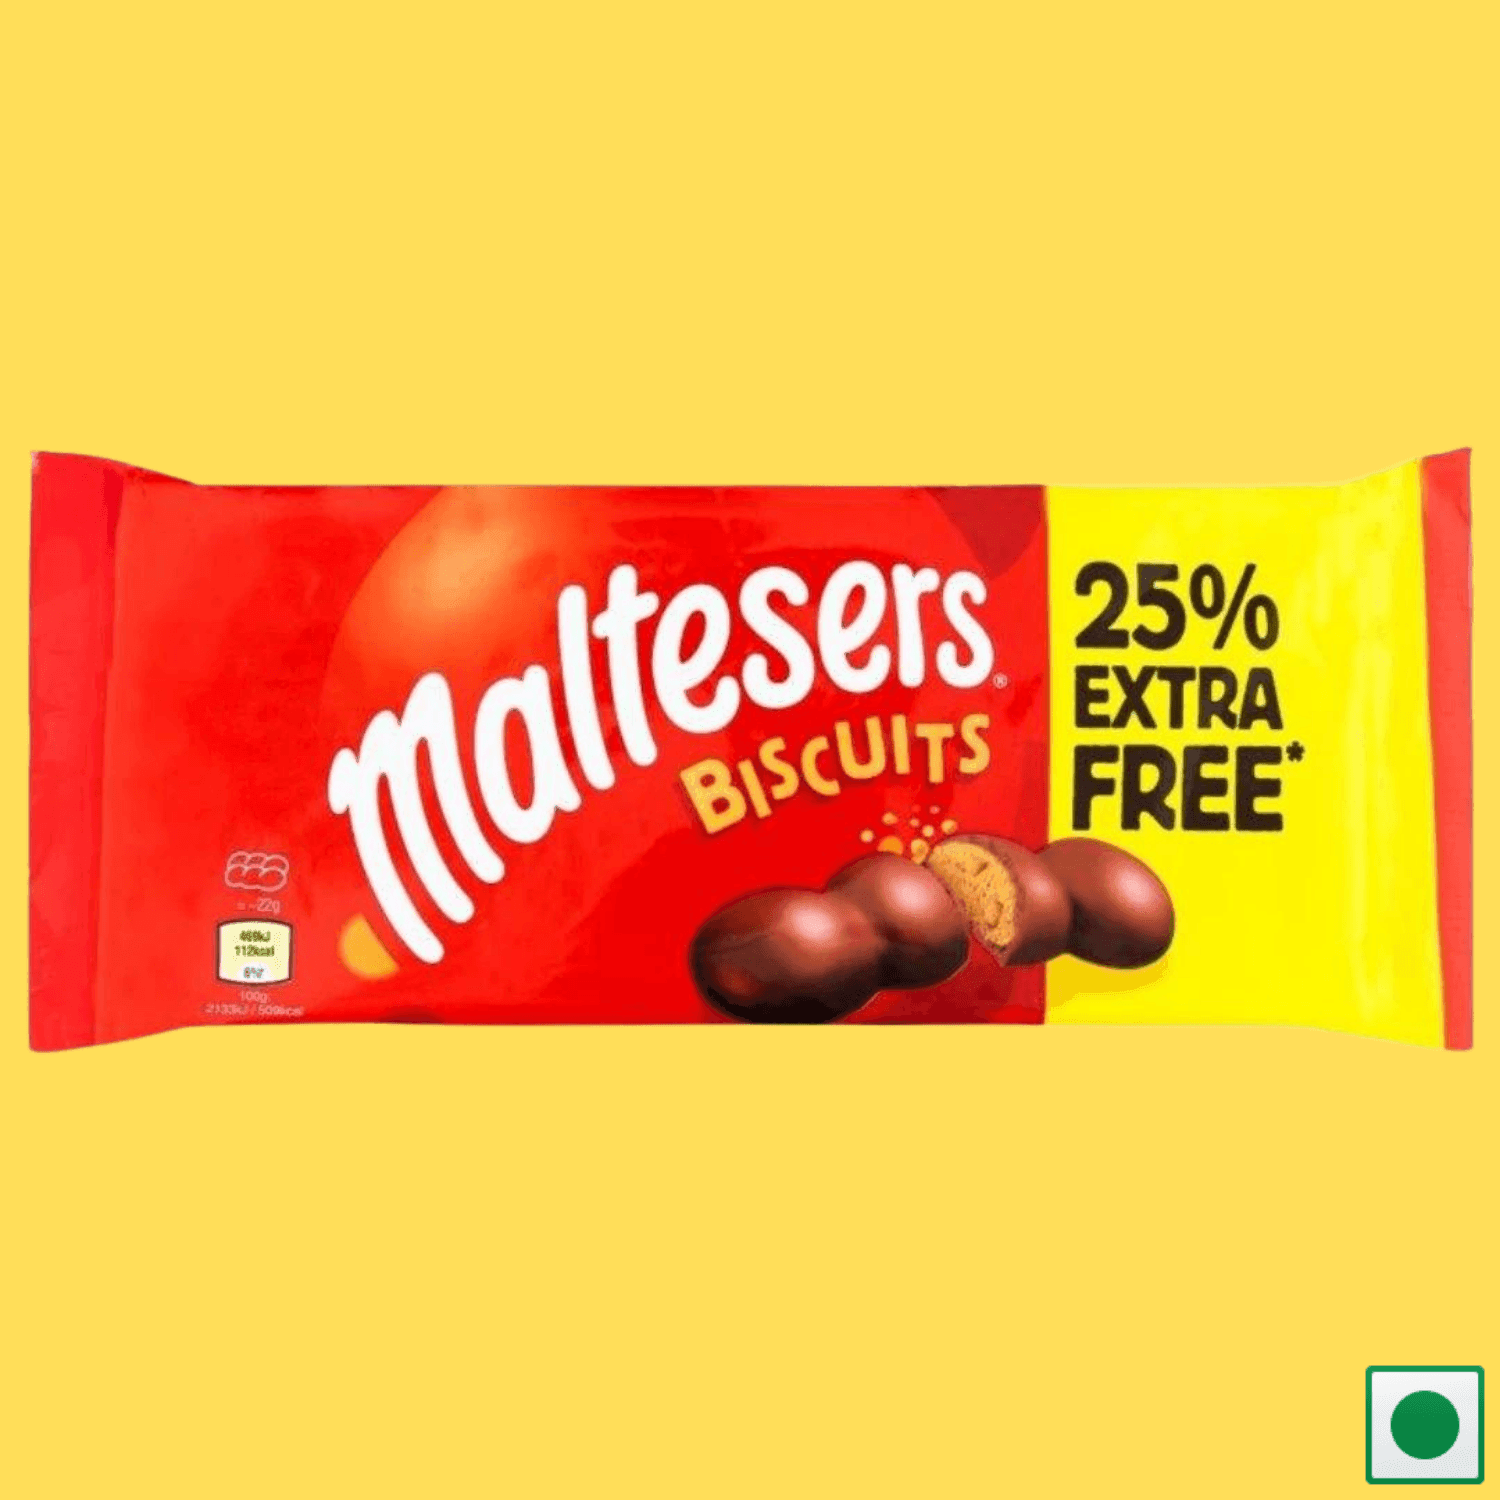 Maltesers Chocolate Biscuits 25% Extra, 110g (Imported) - Super 7 Mart